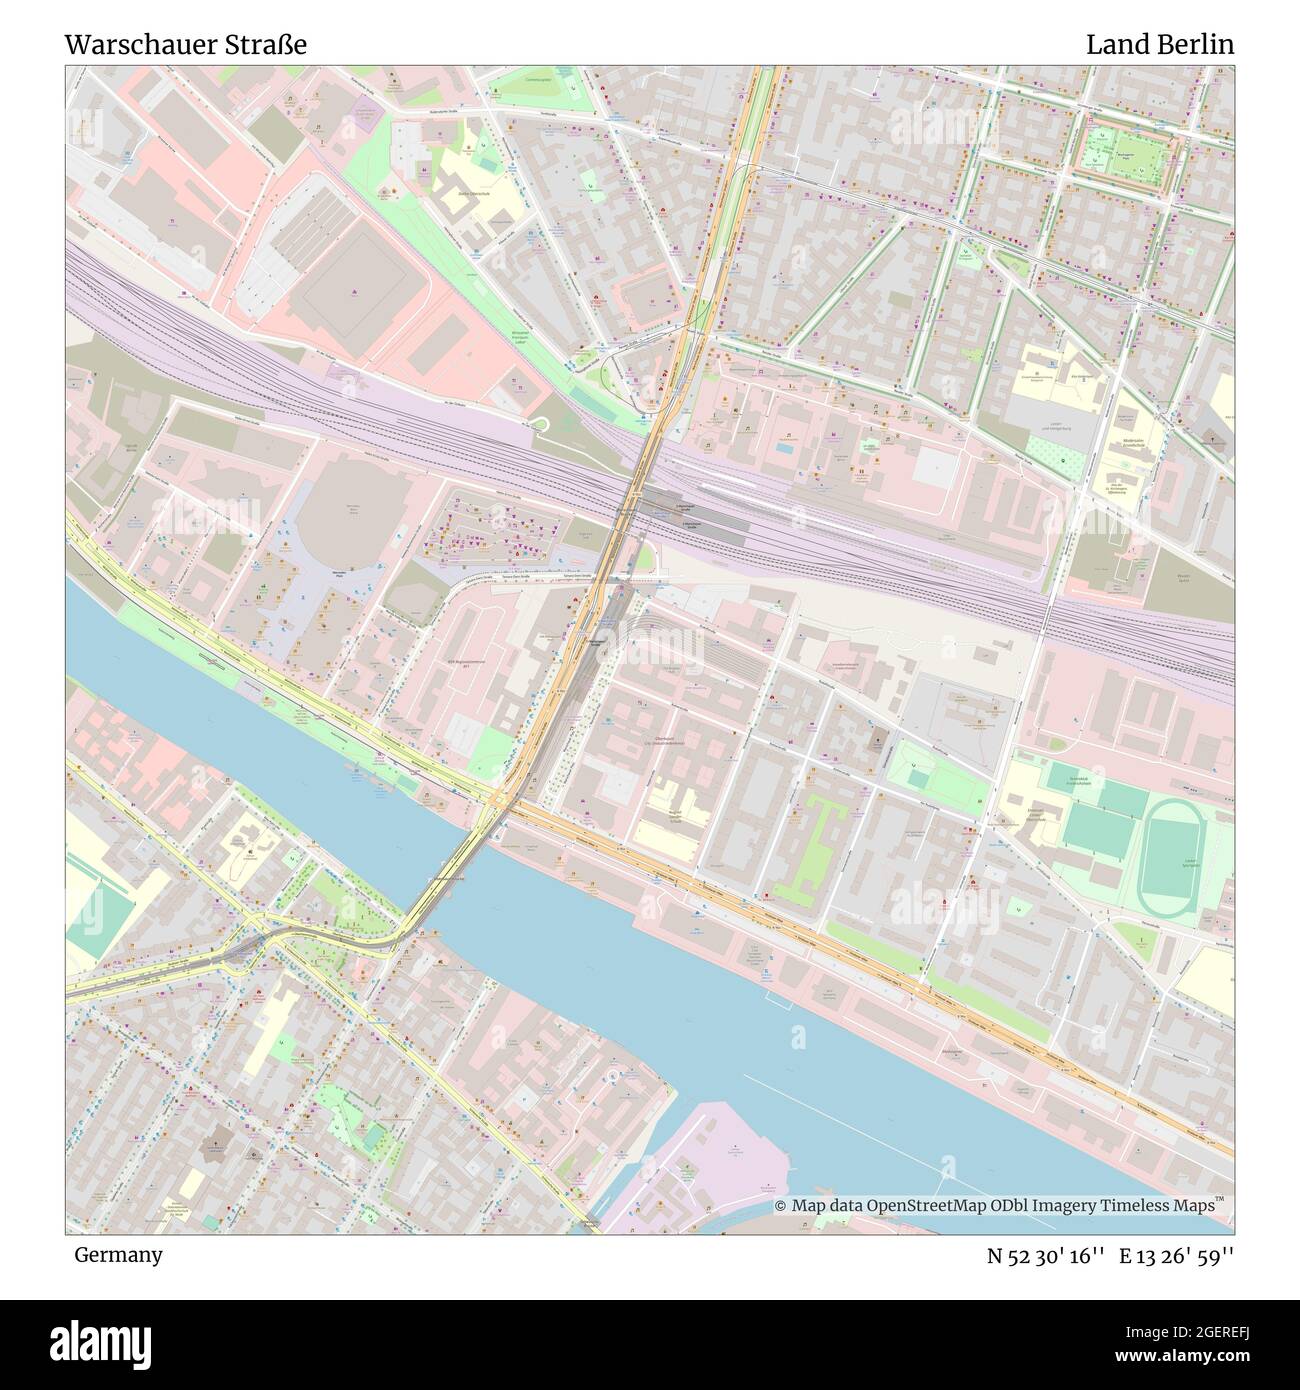 Warschauer Straße, Germany, Land Berlin, N 52 30' 16'', E 13 26' 59'', map, Timeless Map published in 2021. Travelers, explorers and adventurers like Florence Nightingale, David Livingstone, Ernest Shackleton, Lewis and Clark and Sherlock Holmes relied on maps to plan travels to the world's most remote corners, Timeless Maps is mapping most locations on the globe, showing the achievement of great dreams Stock Photo